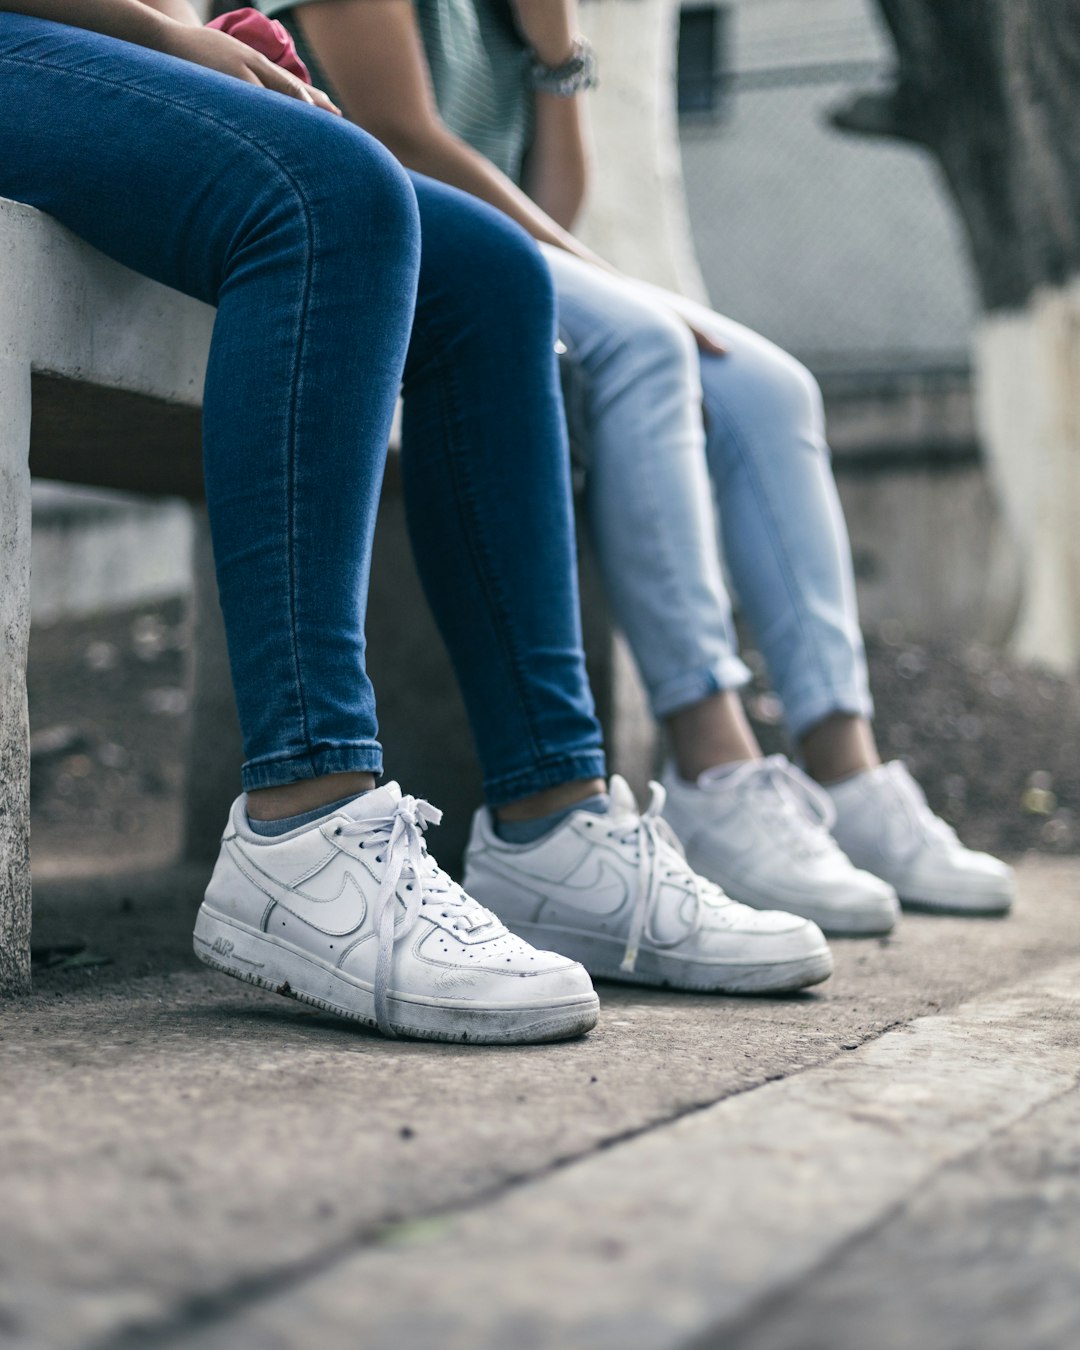 person in blue denim jeans and white nike sneakers sitting on concrete bench